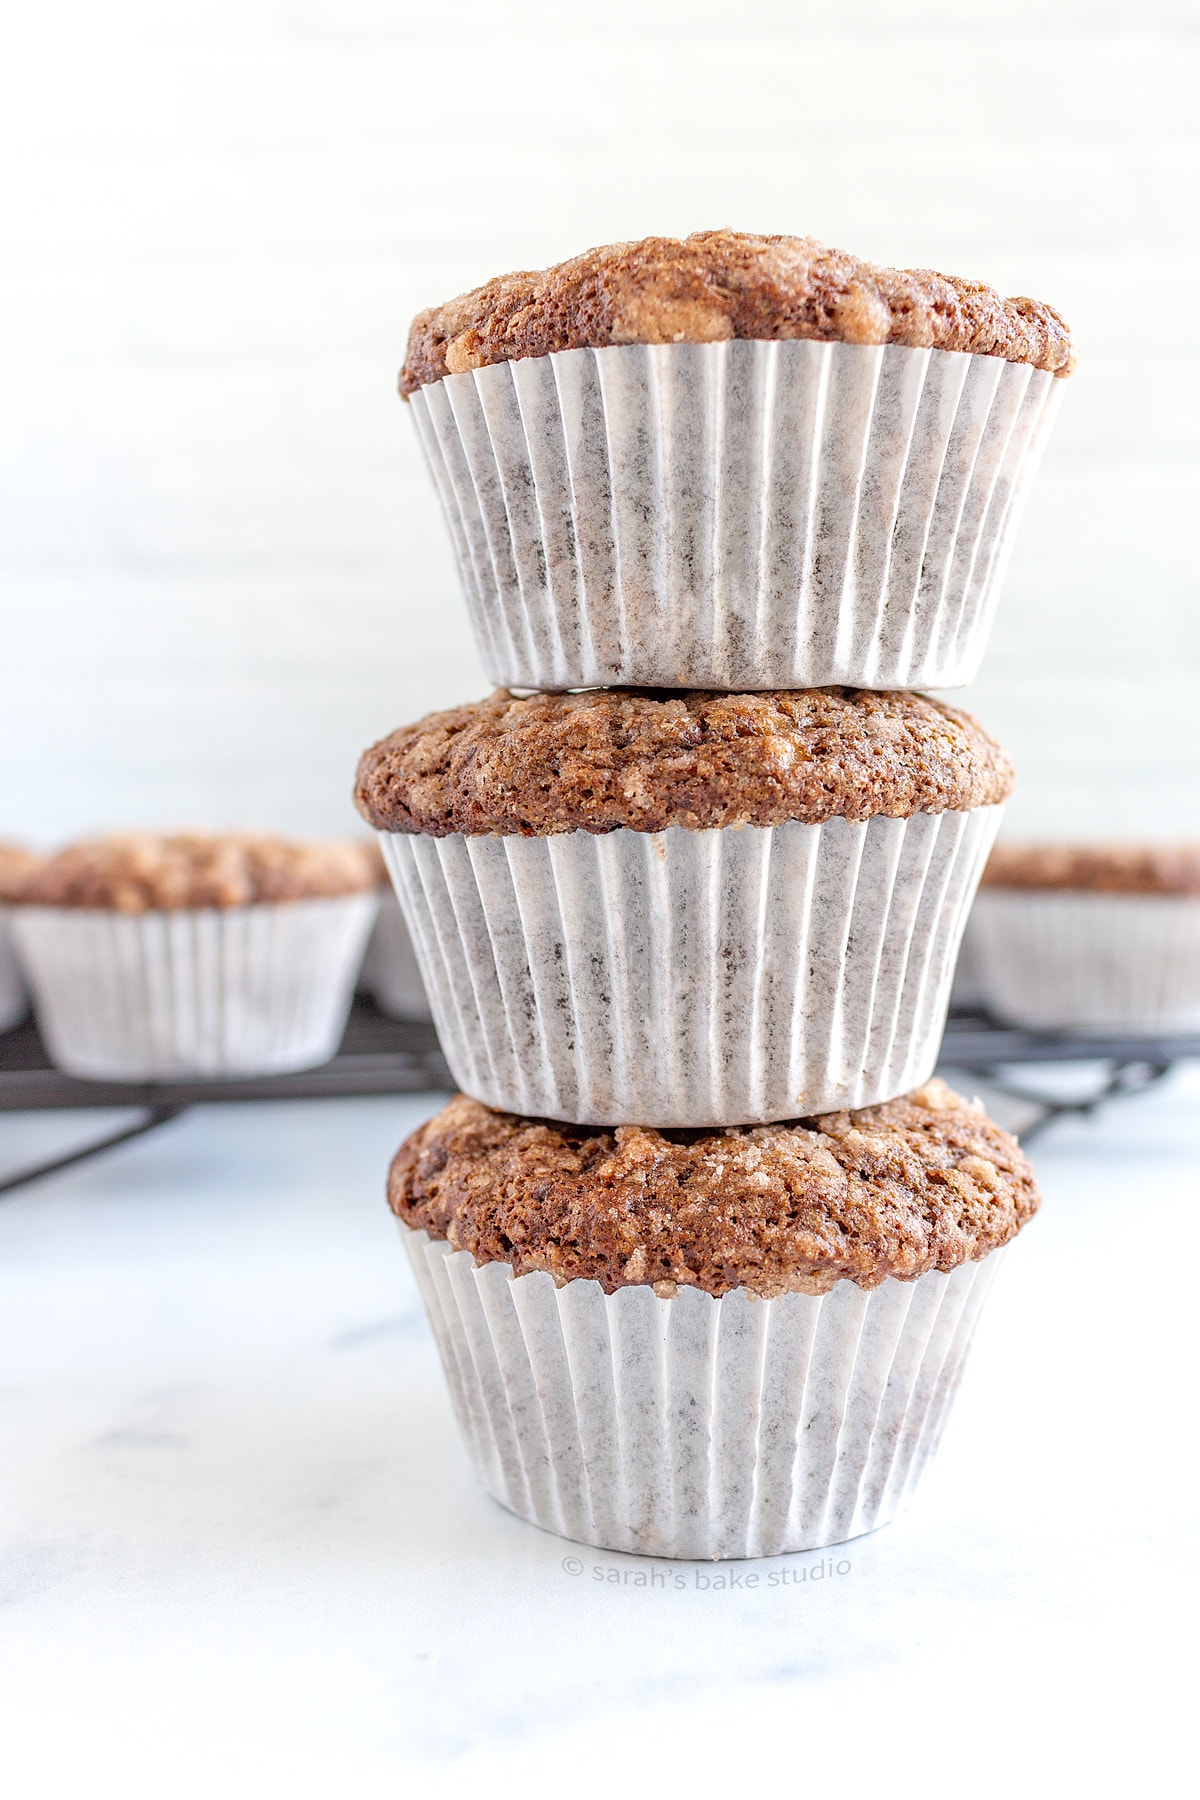 A stacked tower of three Double Chocolate Banana Muffins.